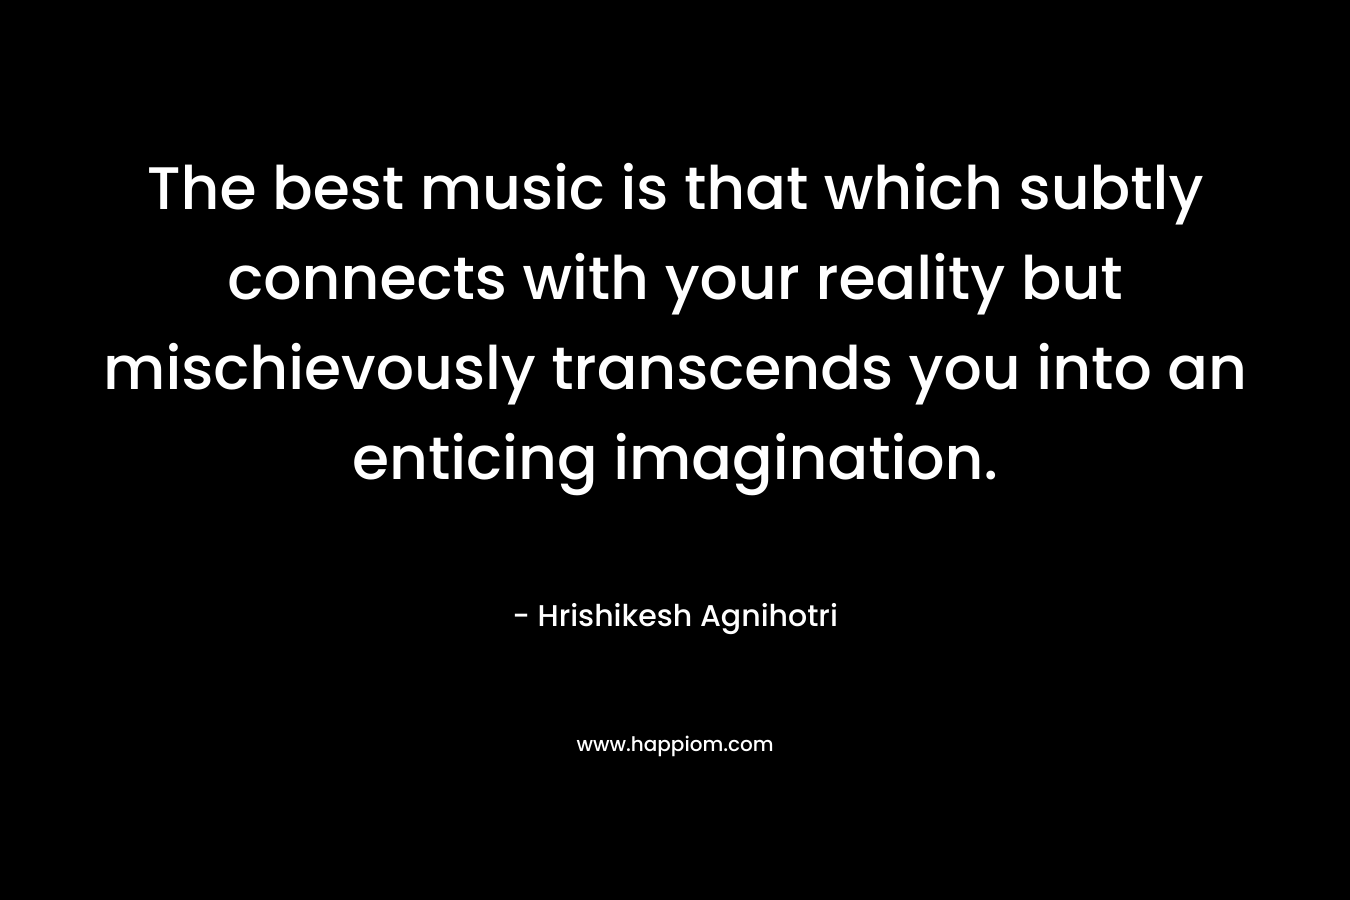 The best music is that which subtly connects with your reality but mischievously transcends you into an enticing imagination. – Hrishikesh Agnihotri